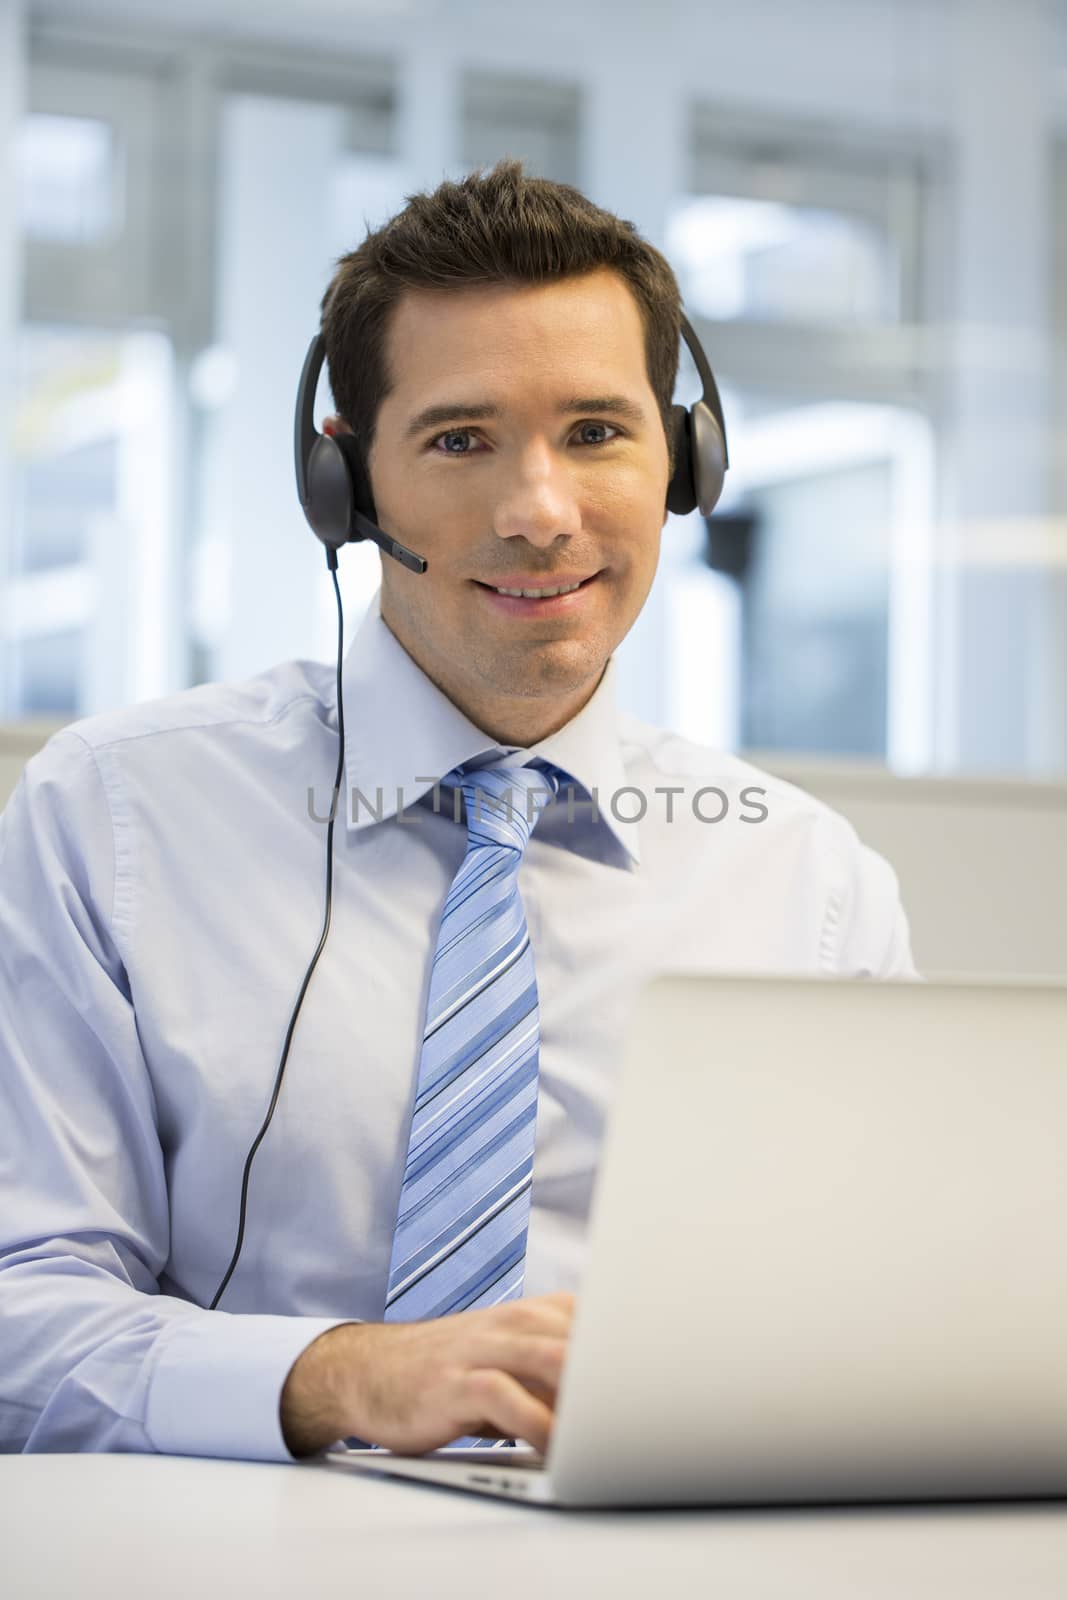 Consultant in the office on the phone with headset by LDProd